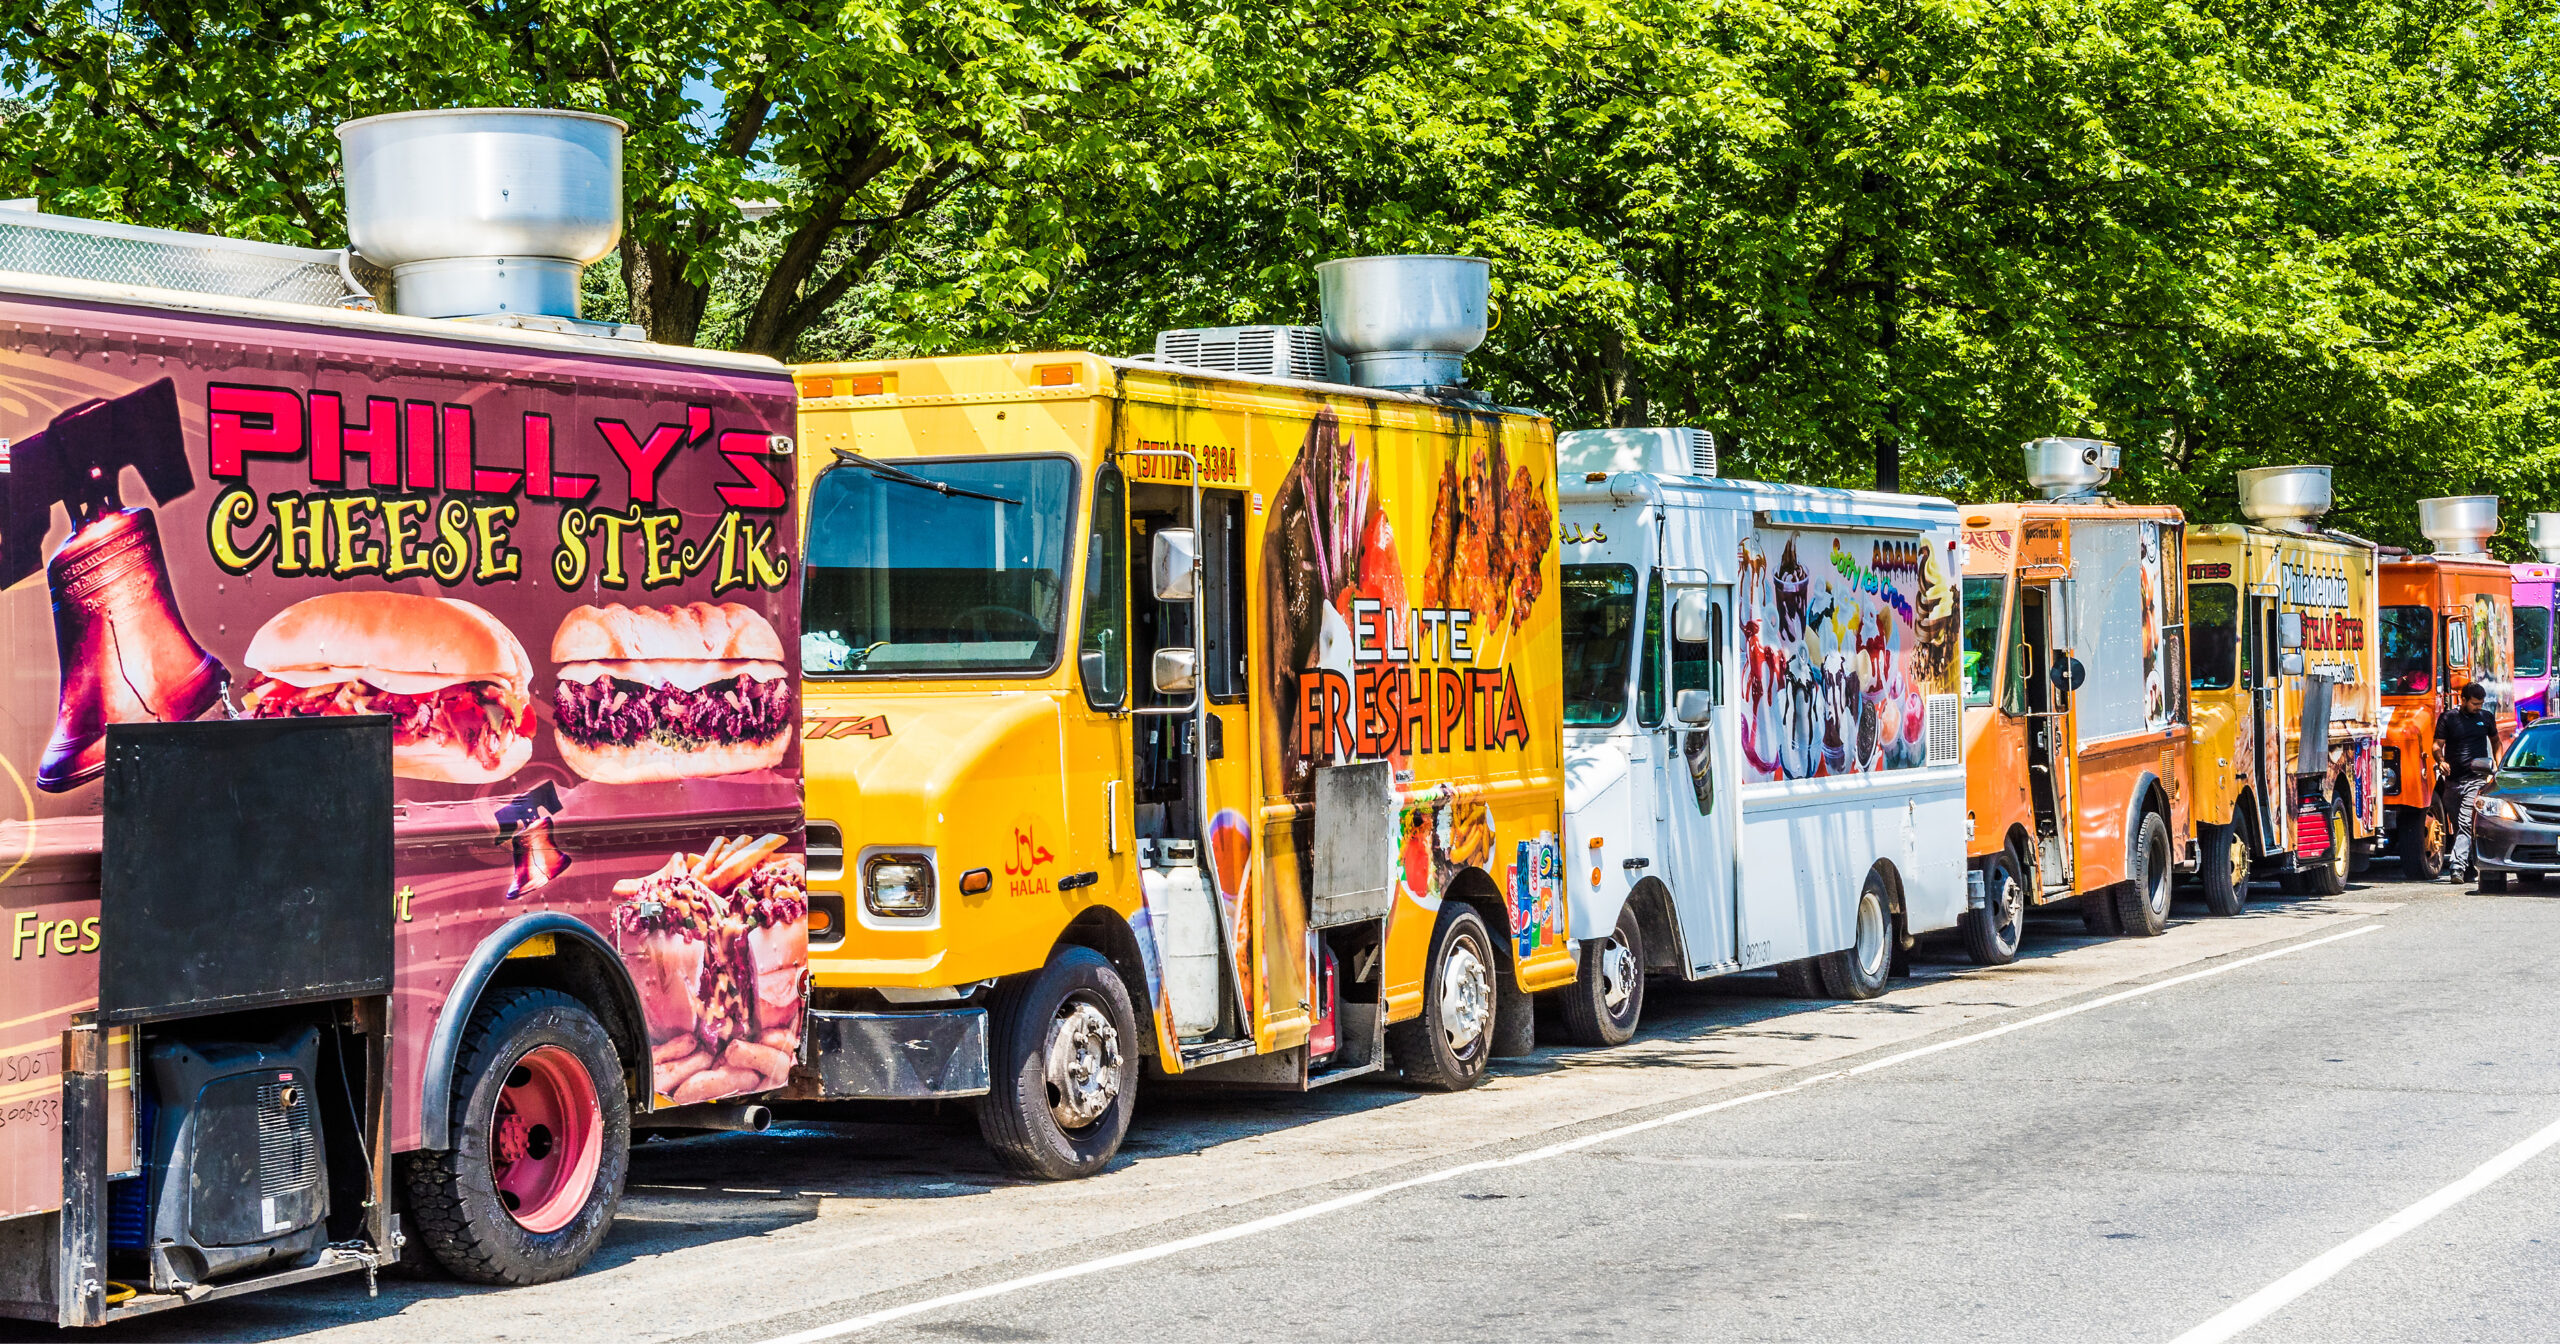 Food trucks lined up and ready. Brian Chicoine image scaled